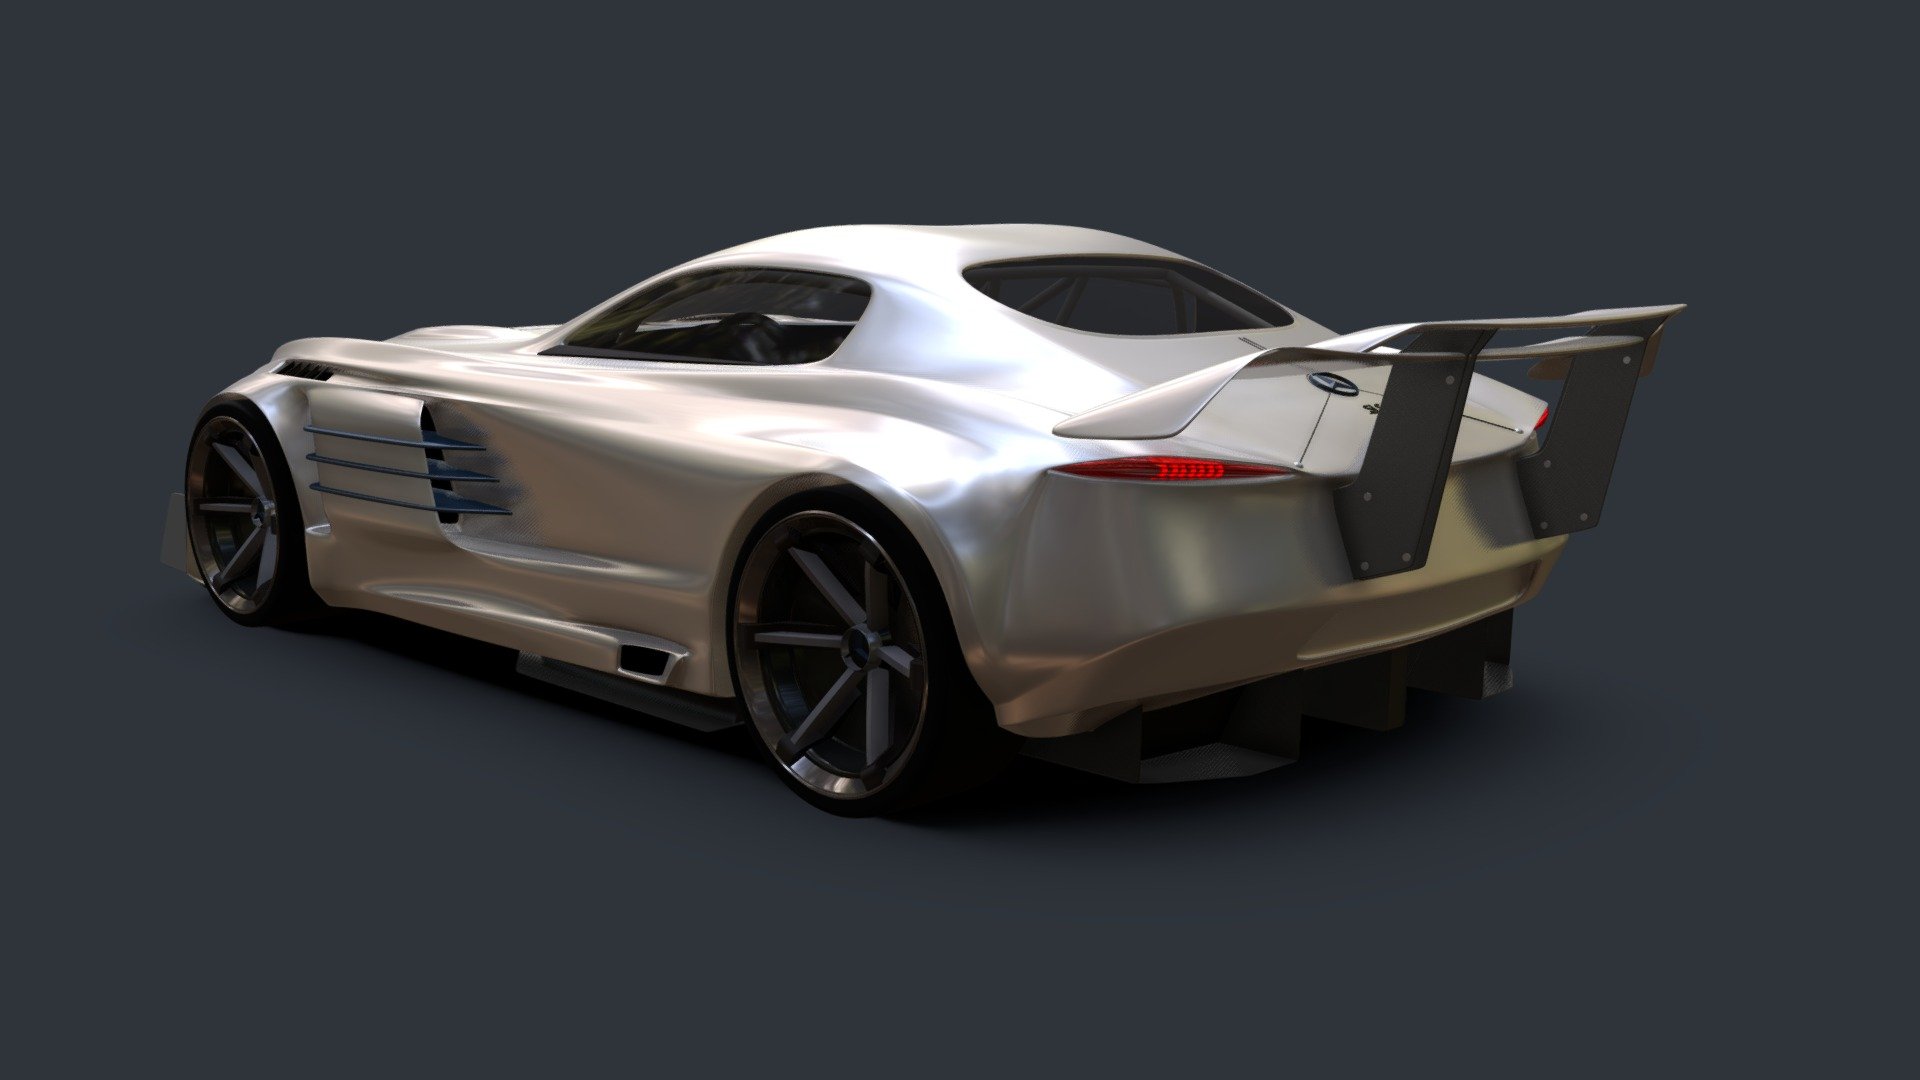 The race variant of my take on a conceptual reboot of the mighty Mercedes Benz SLS AMG &ldquo;Gullwing